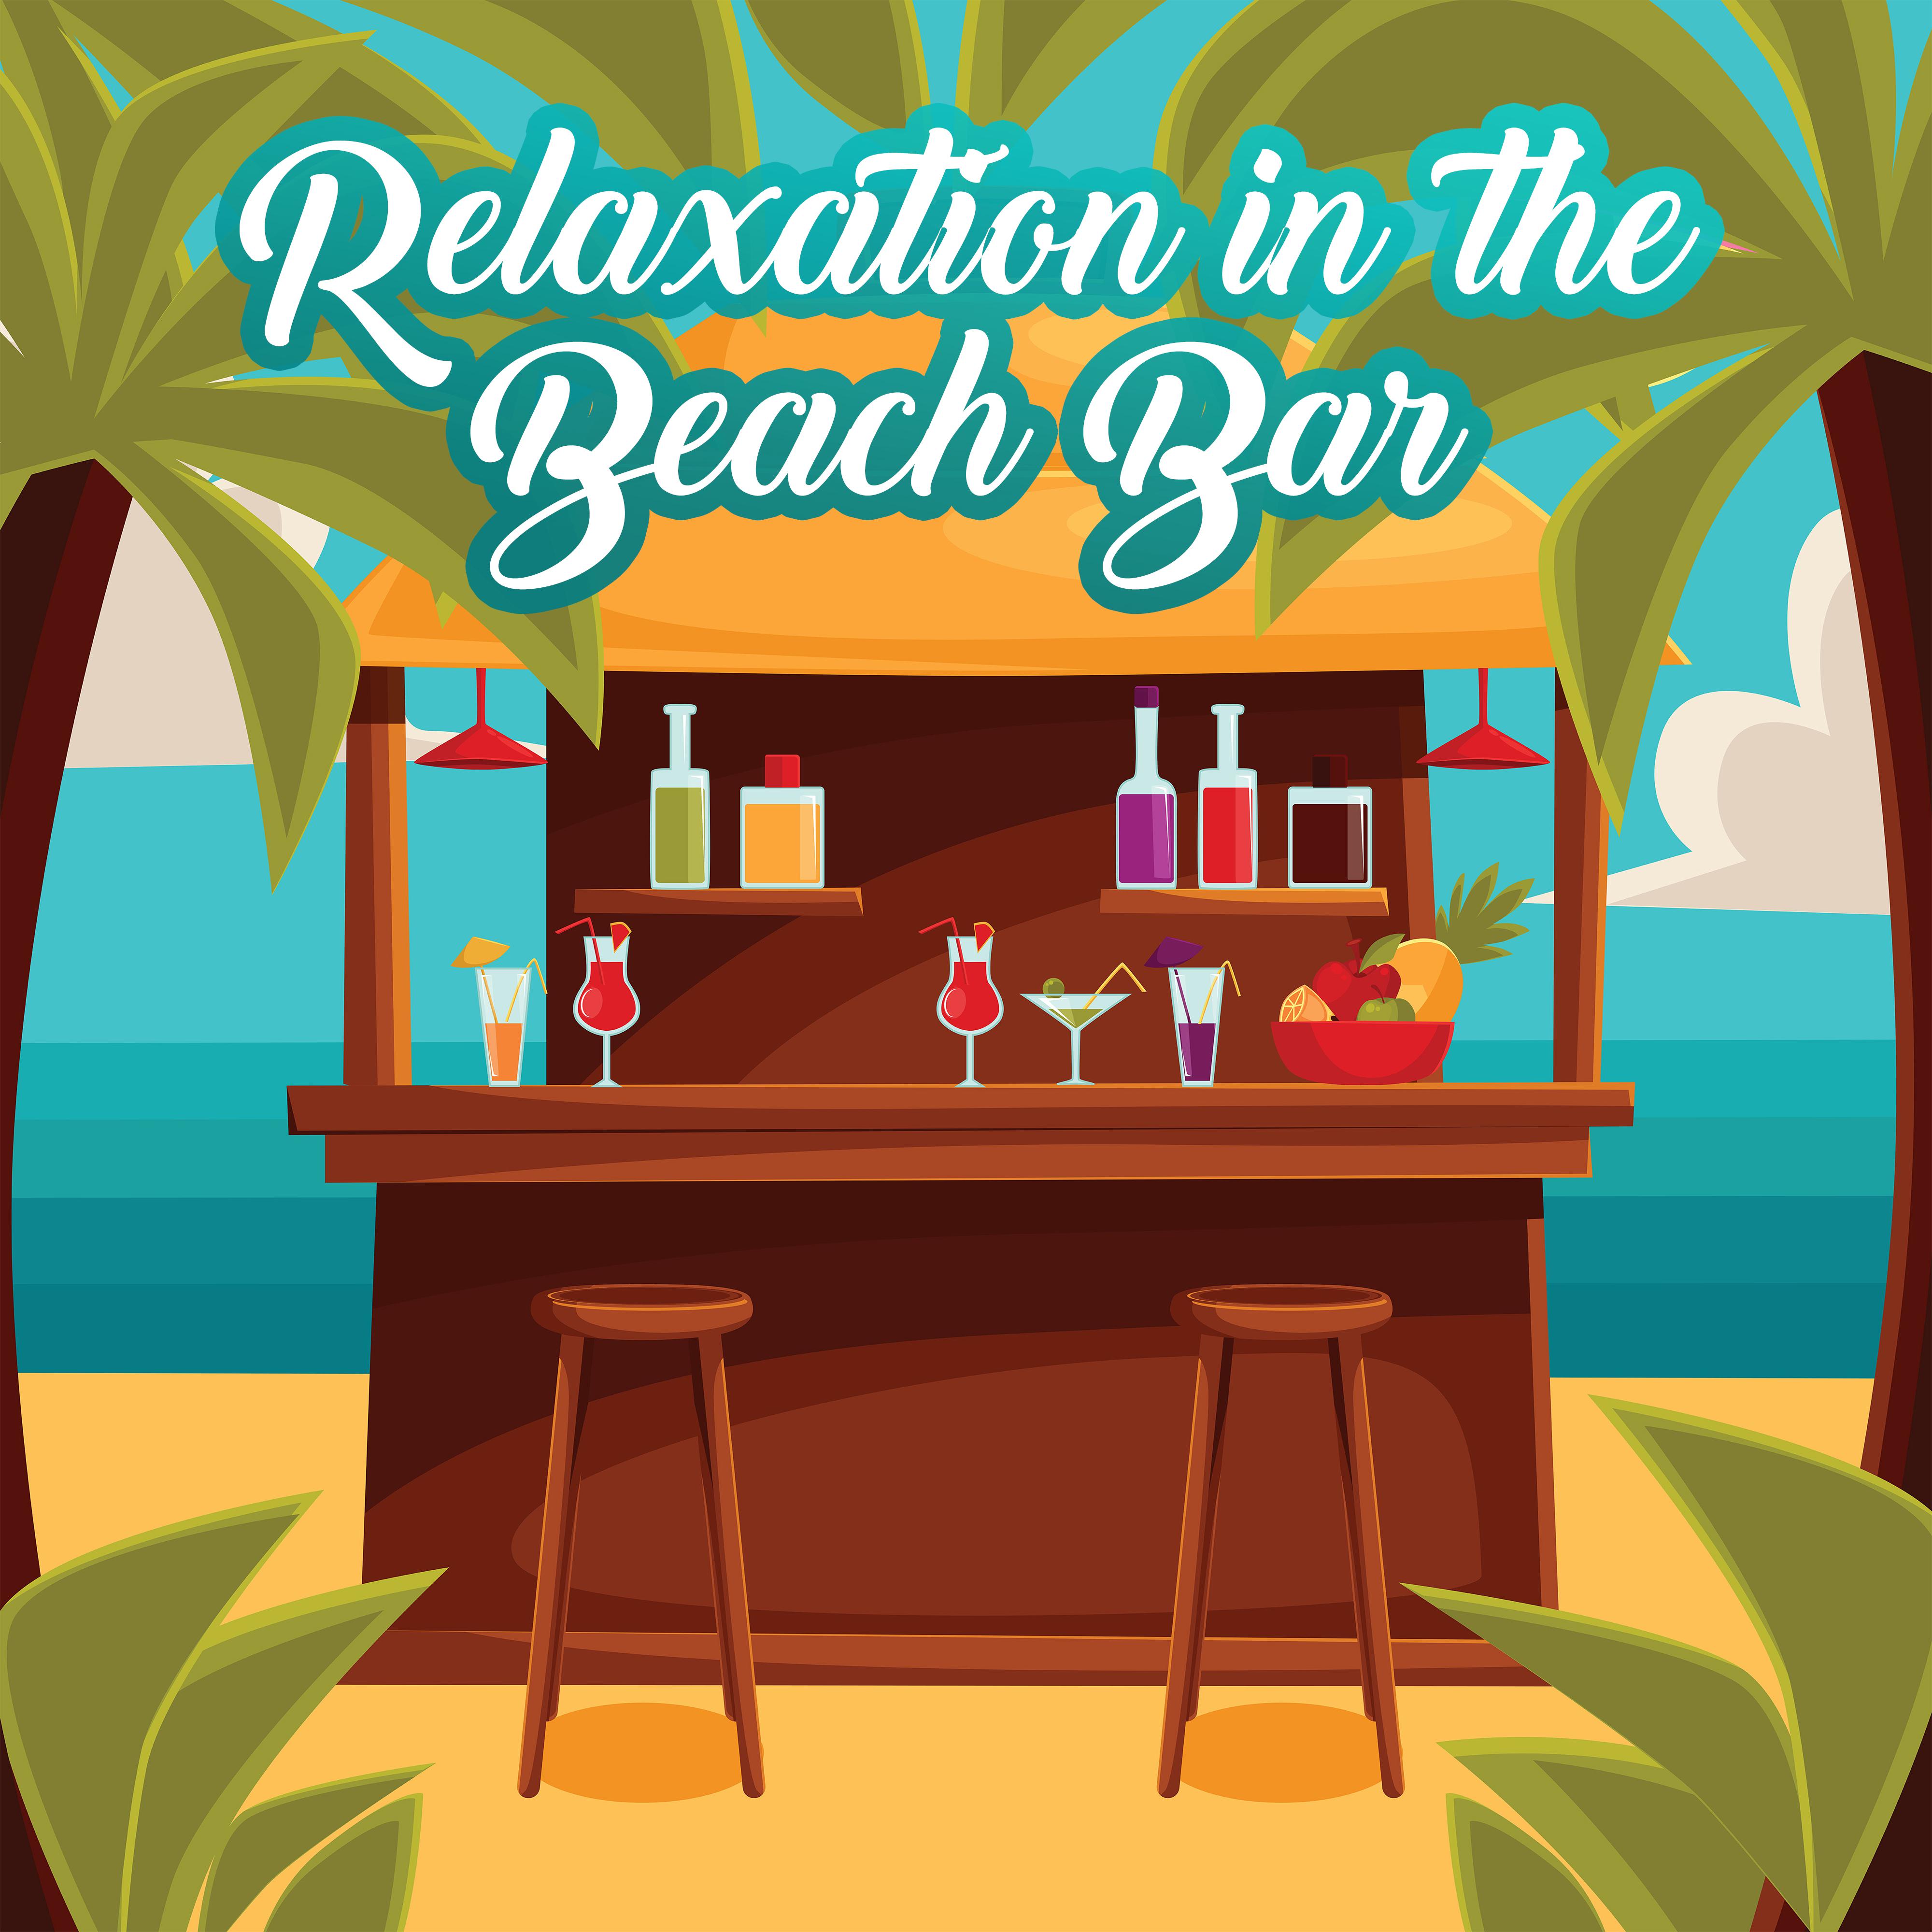 Relaxation in the Beach Bar: 15 Chillout Holiday Songs, Best 2019 Chill Beats, Summer Time Good Vibrations